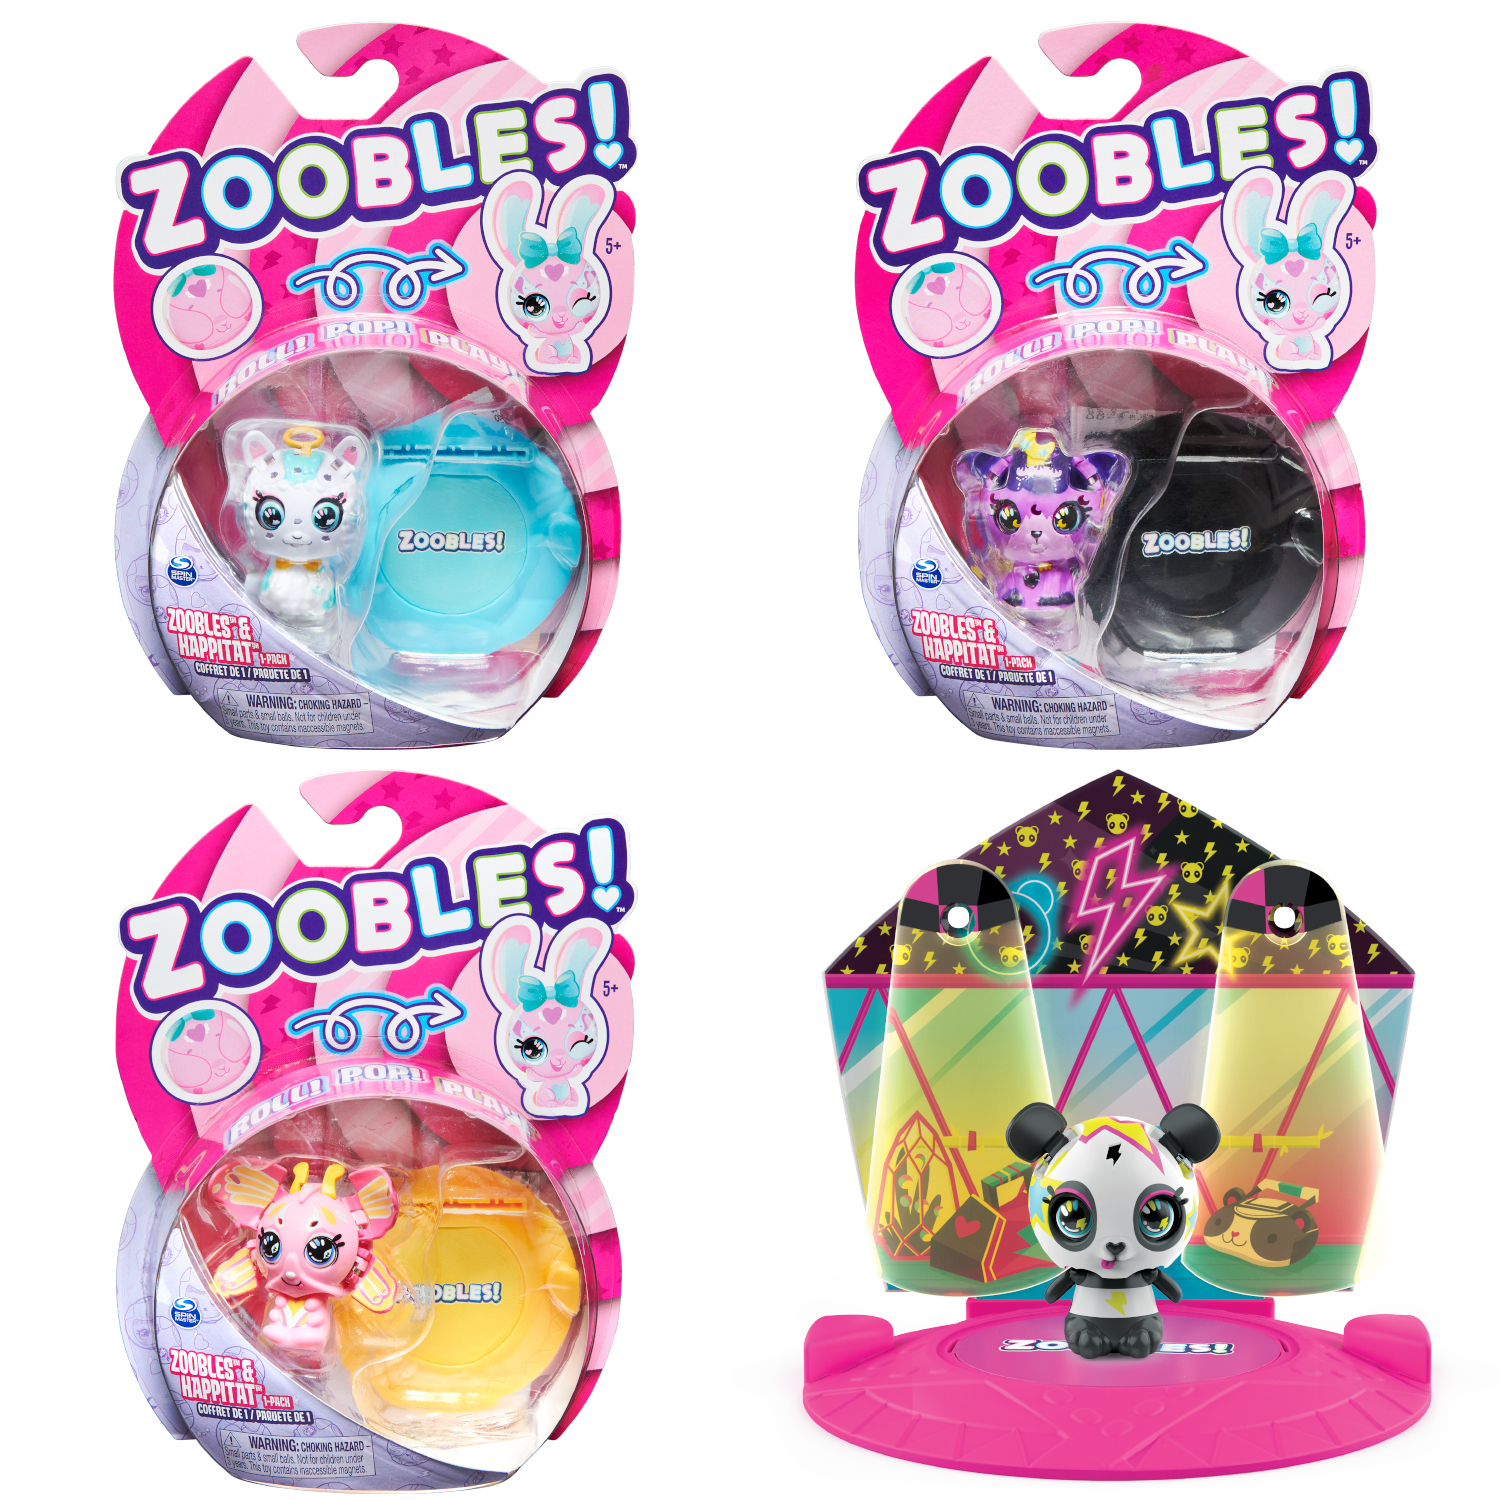 ZOOBLES 1 PACK ASSORTMENT